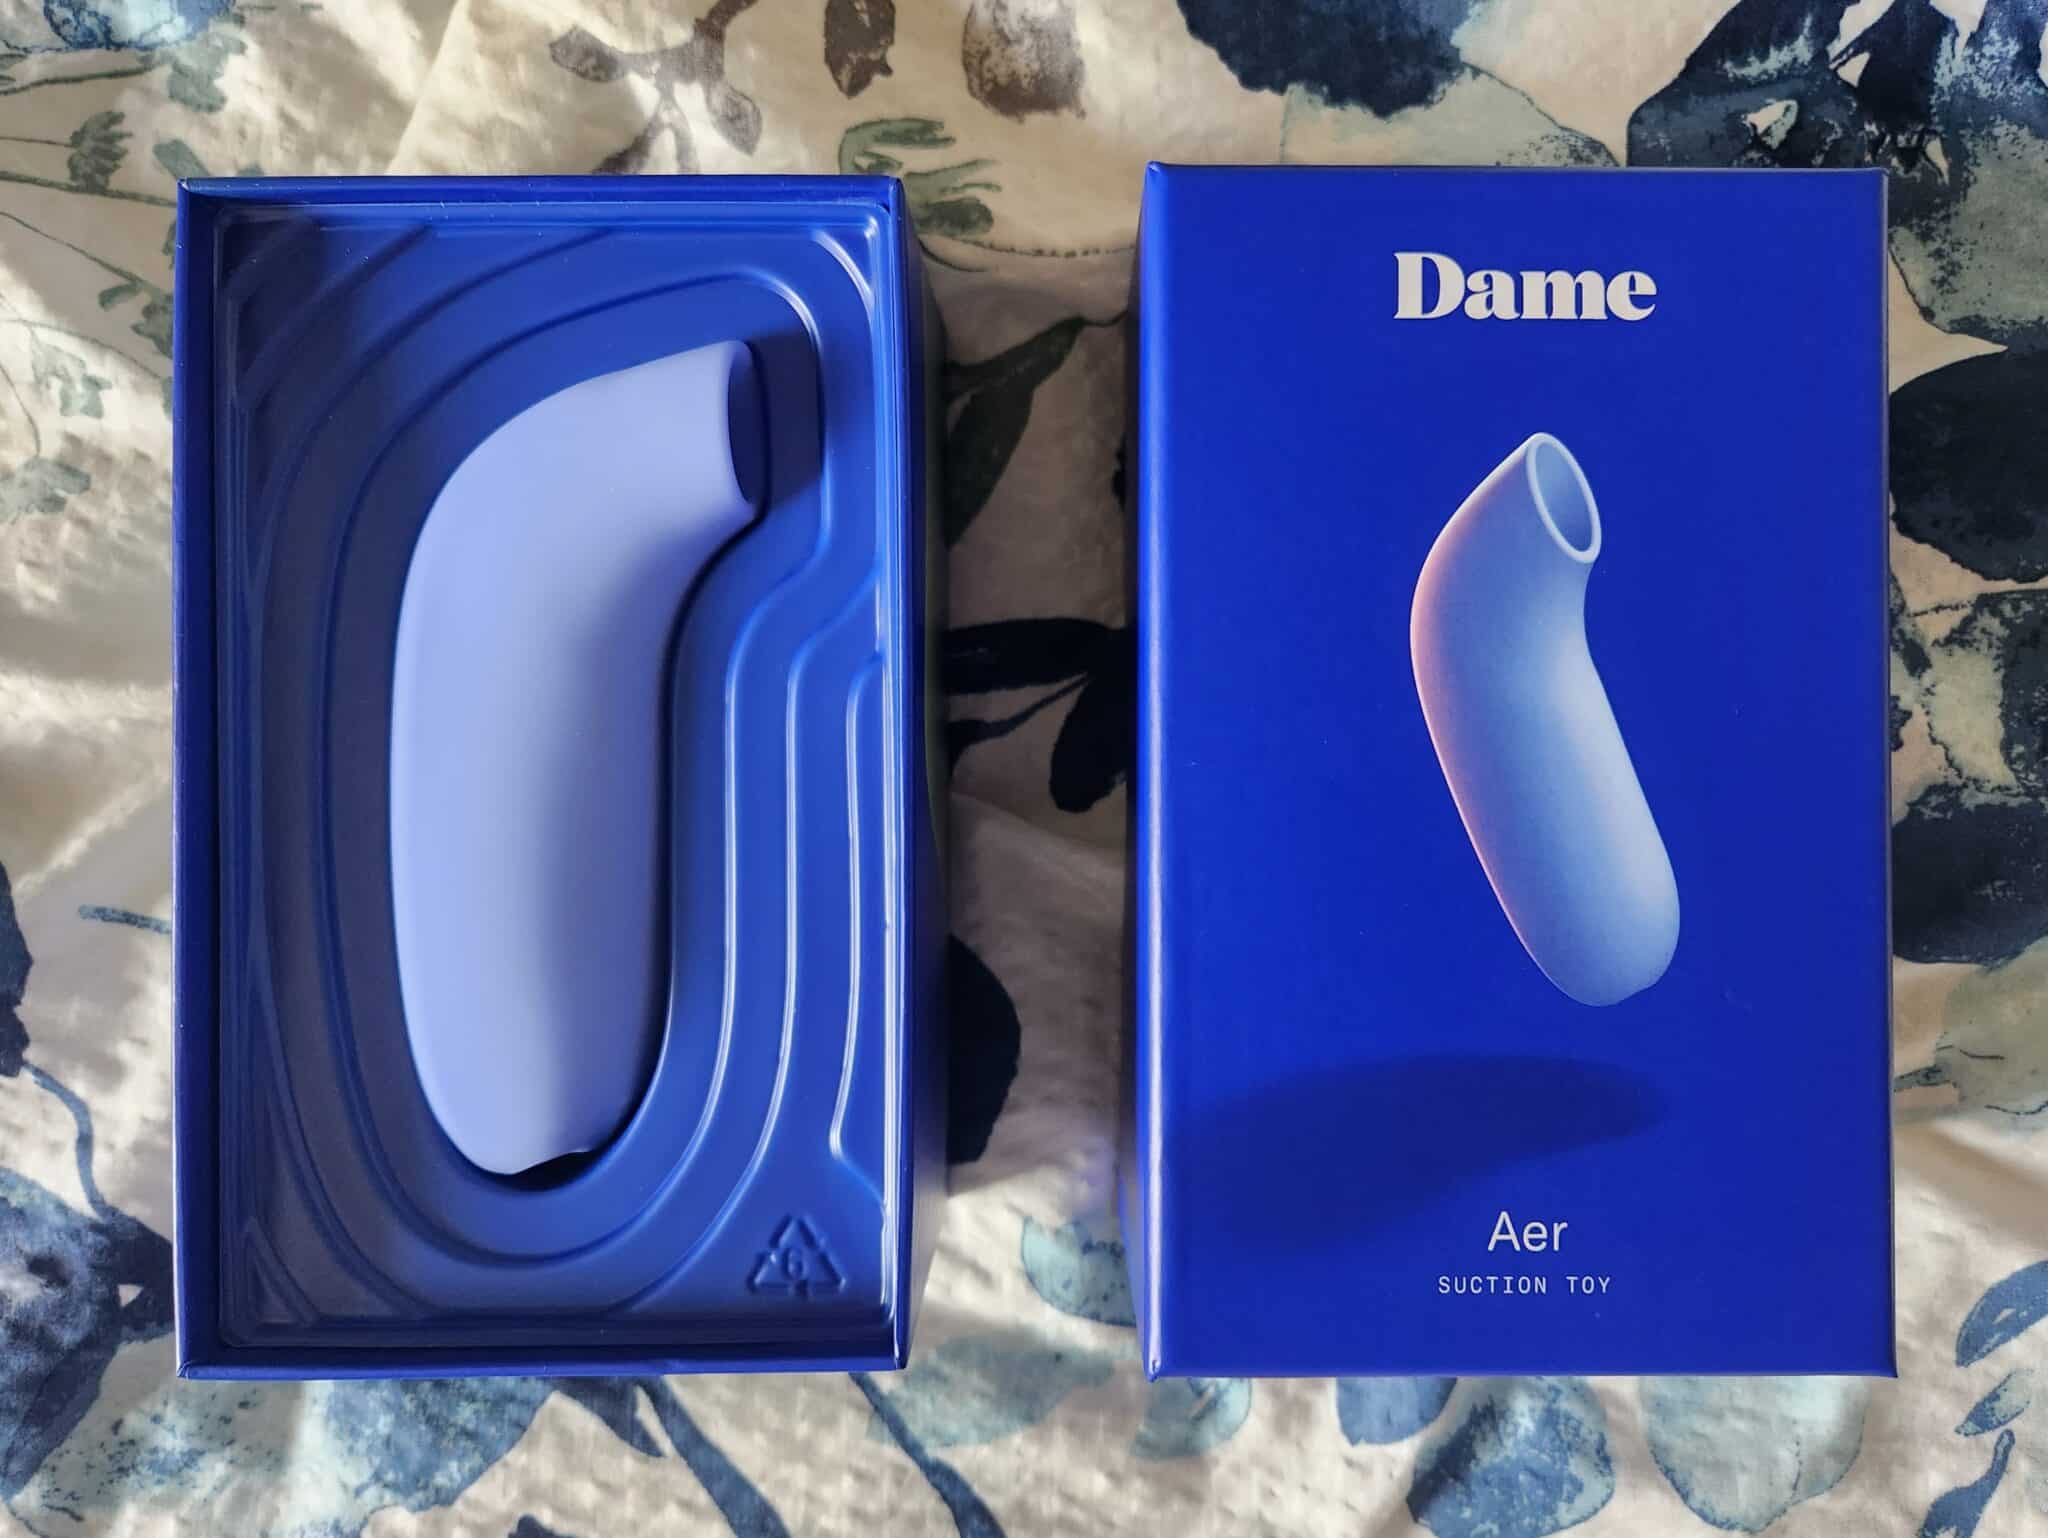 Dame Aer The Dame Aer: Presentation and Packaging